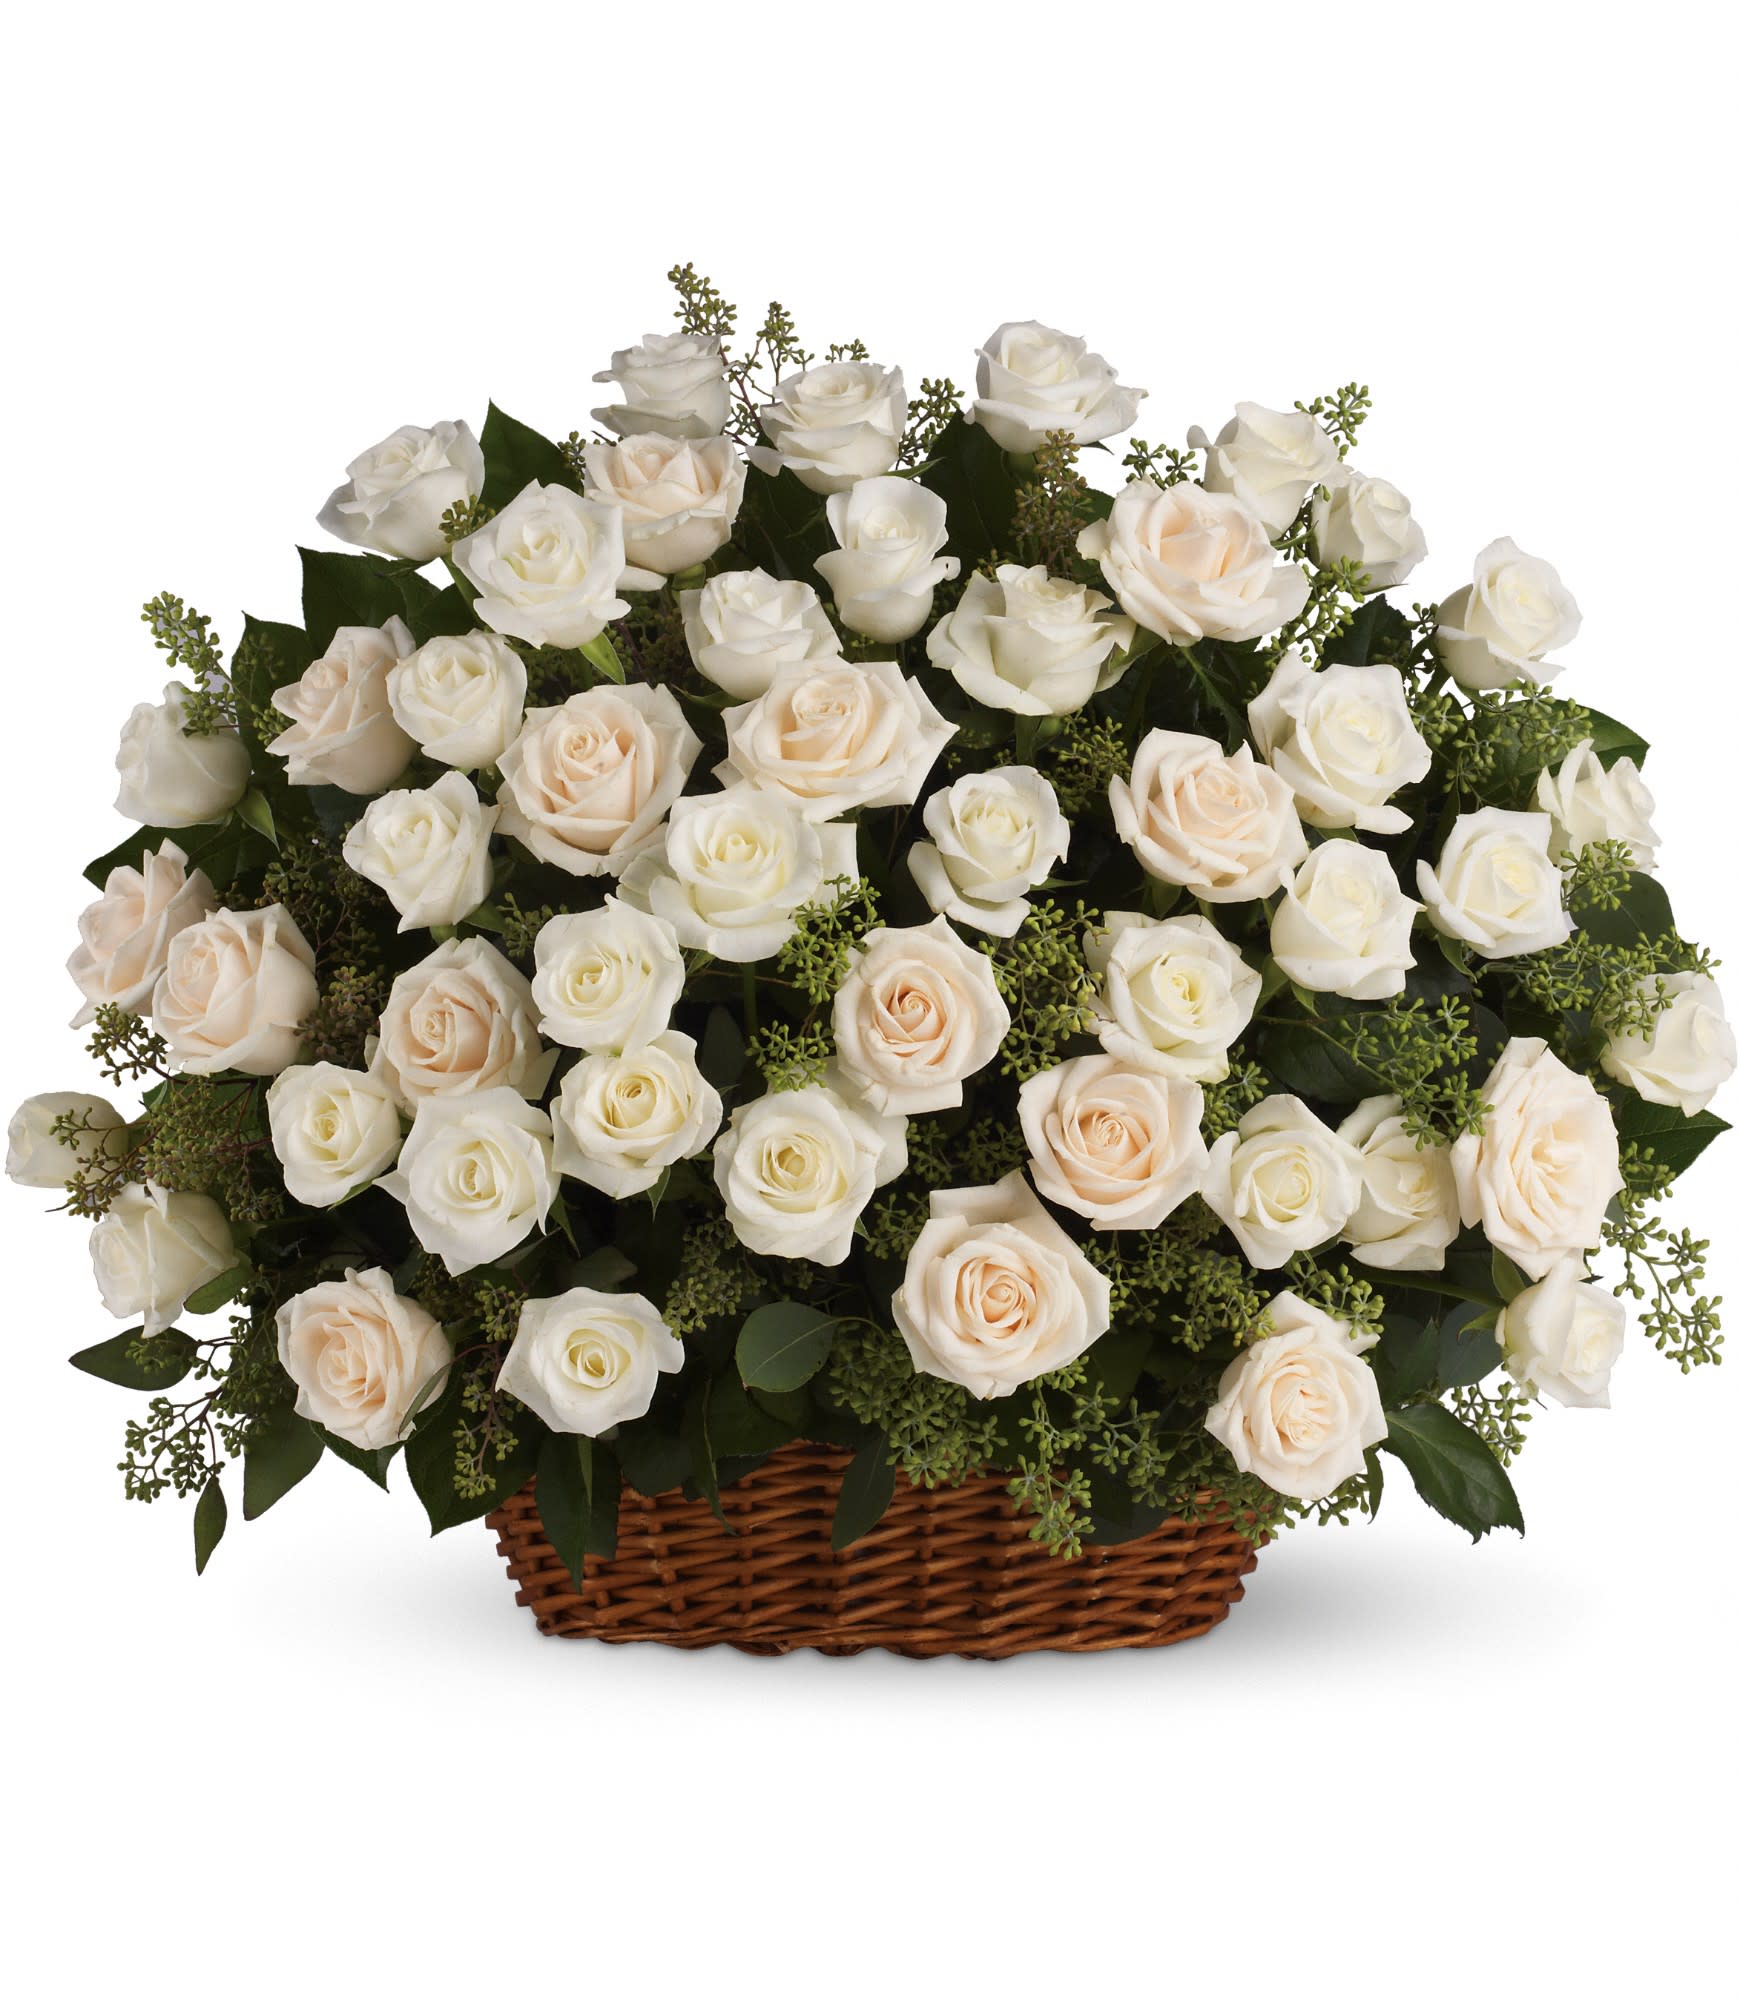 Bountiful Rose Basket by Teleflora - A beautiful, bountiful basket of luminous white roses that feels so fresh, natural, and welcomed in a home or at a service. 